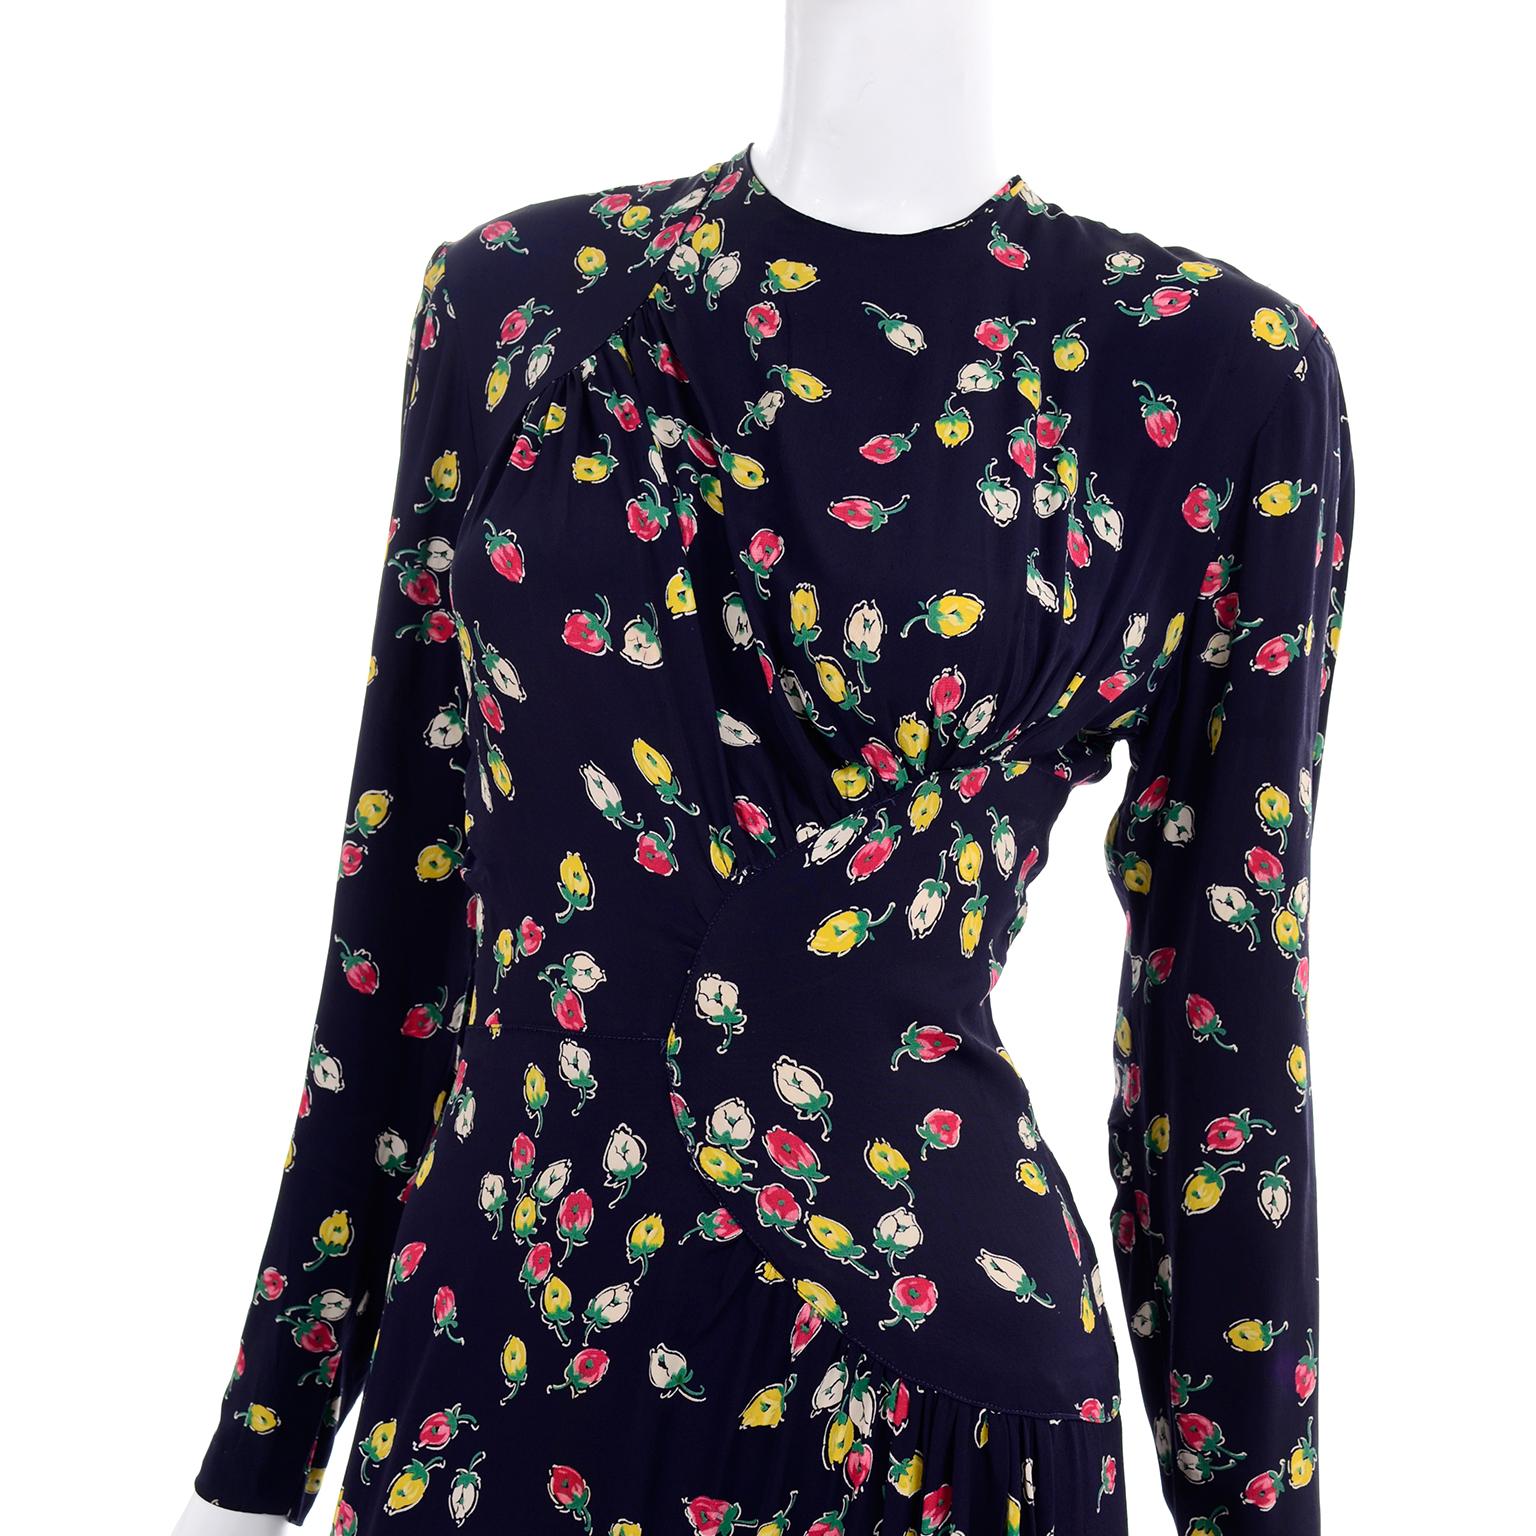 1940s Vintage Dress in Navy Blue Pink & Yellow Rosebud floral Rayon Print For Sale 4